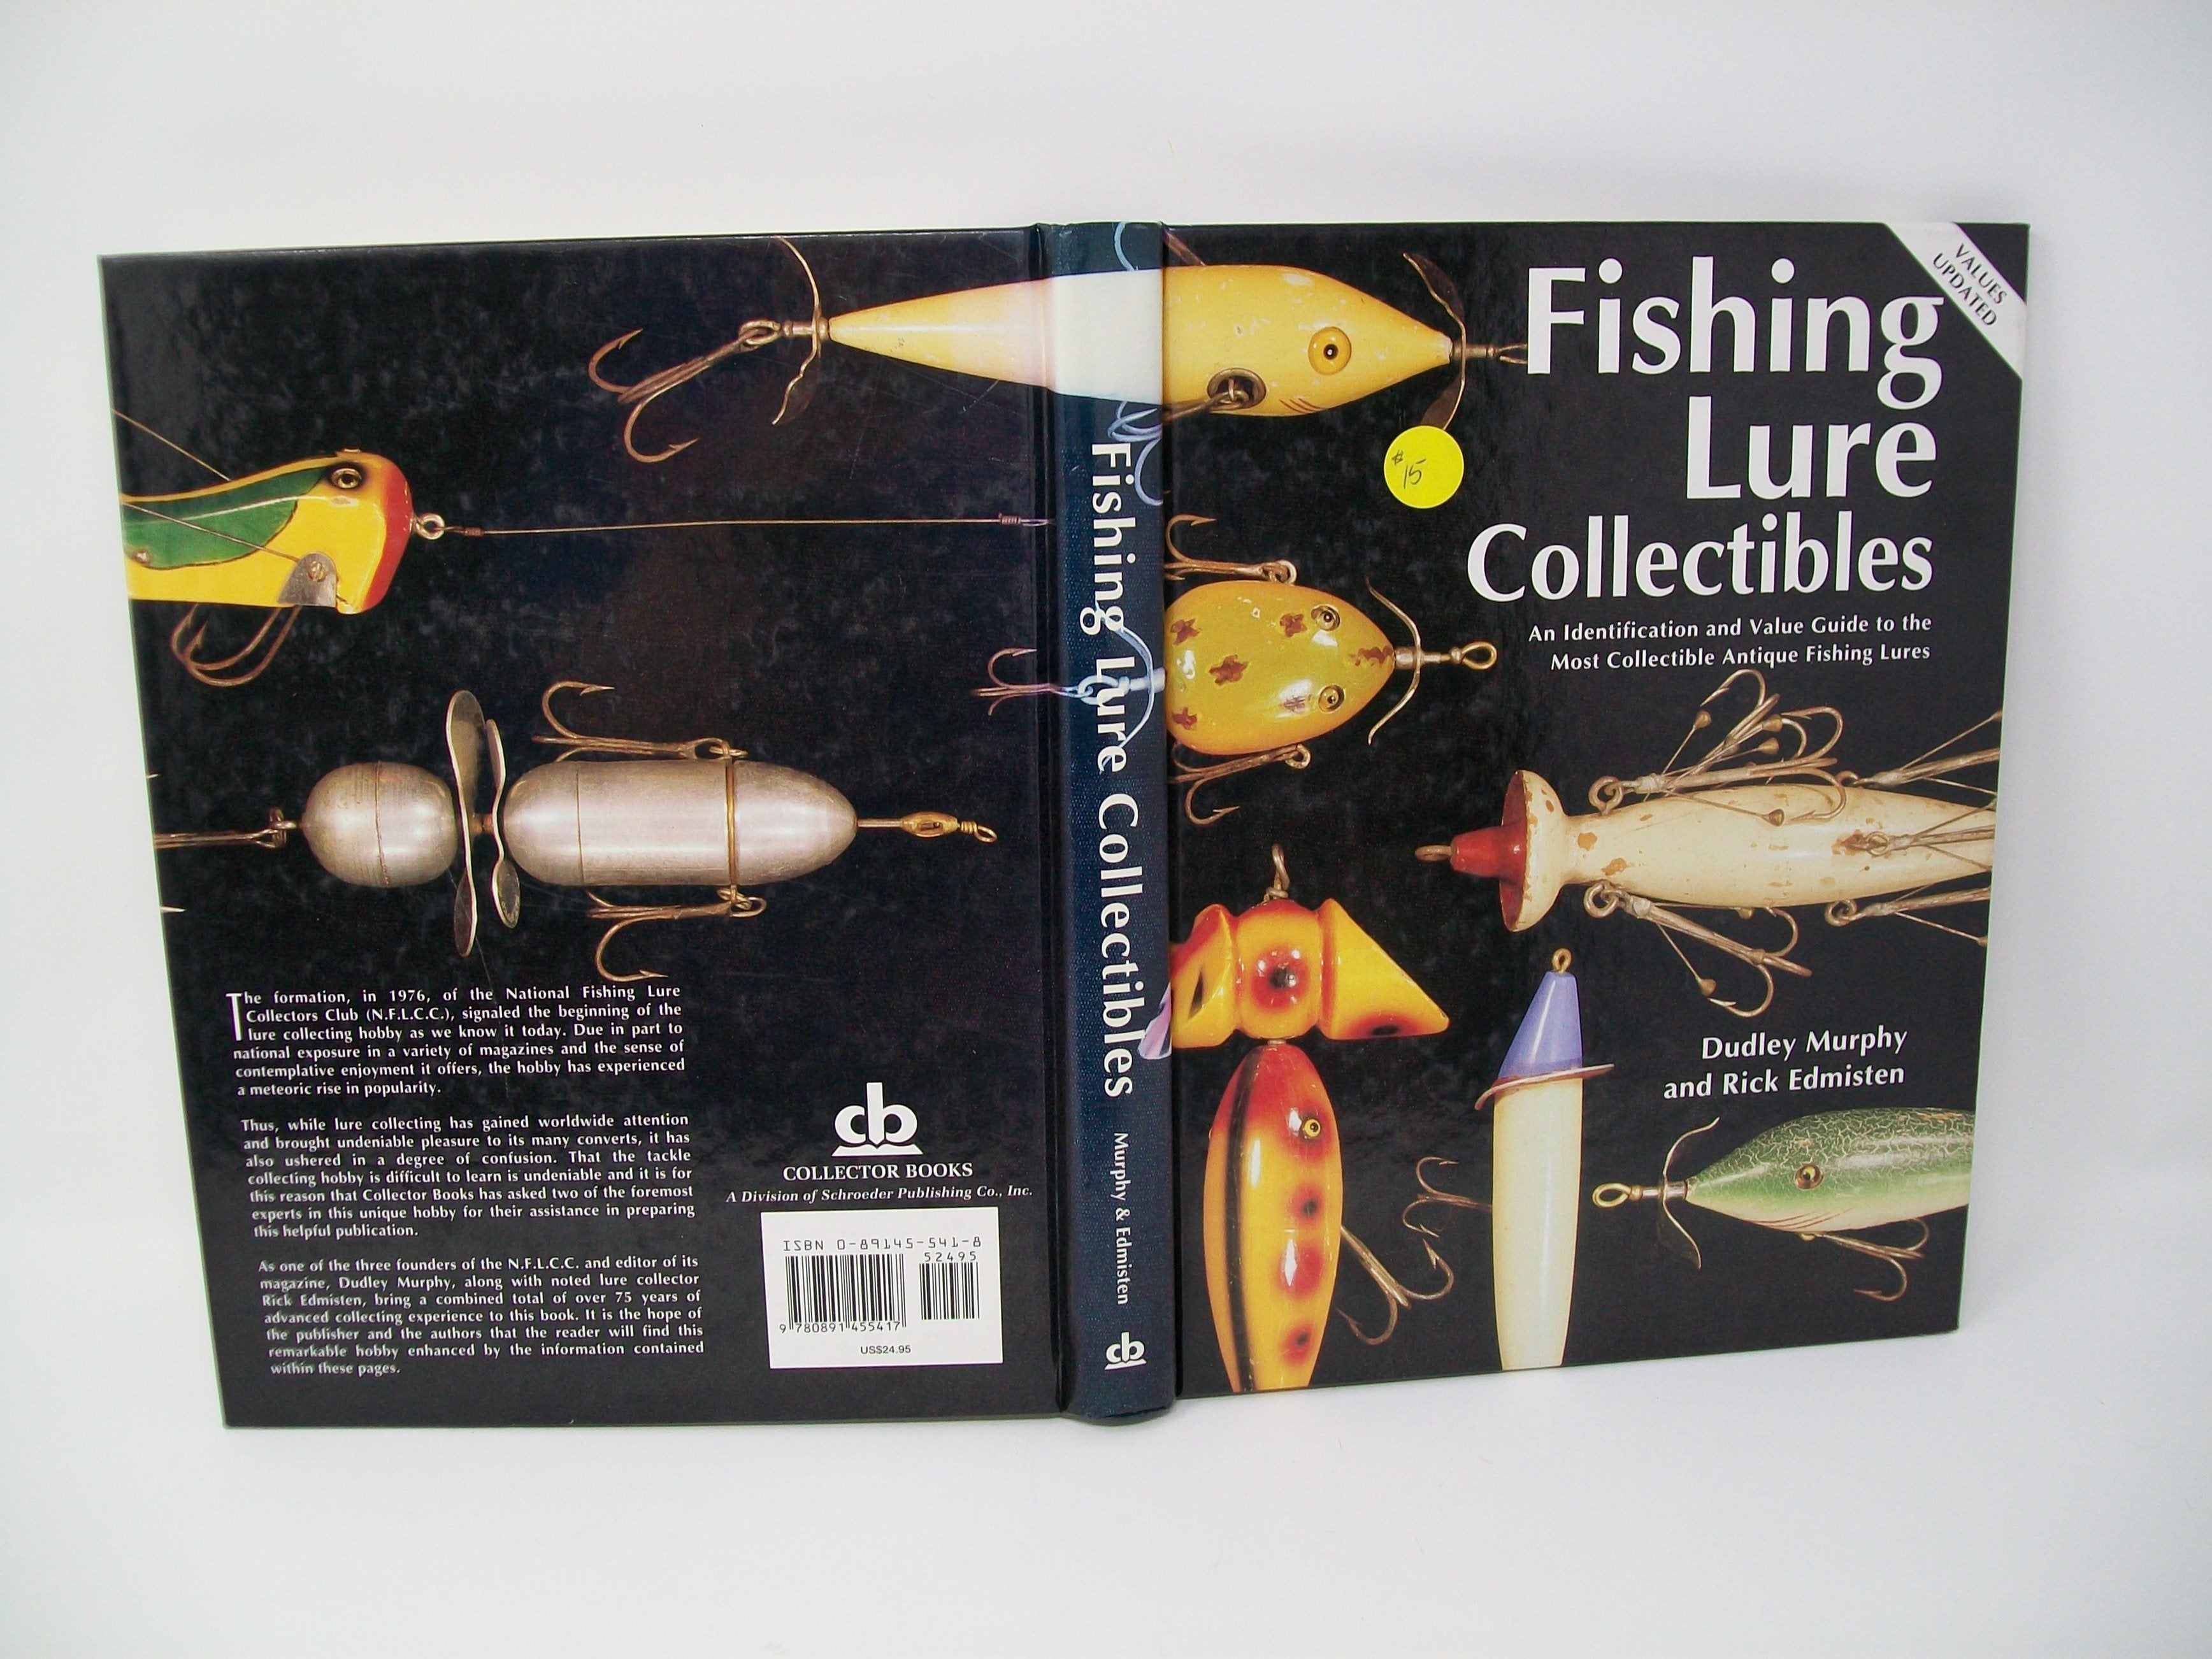 Fishing Lure Collectibles by Dudley Murphy & Rick Edmisten